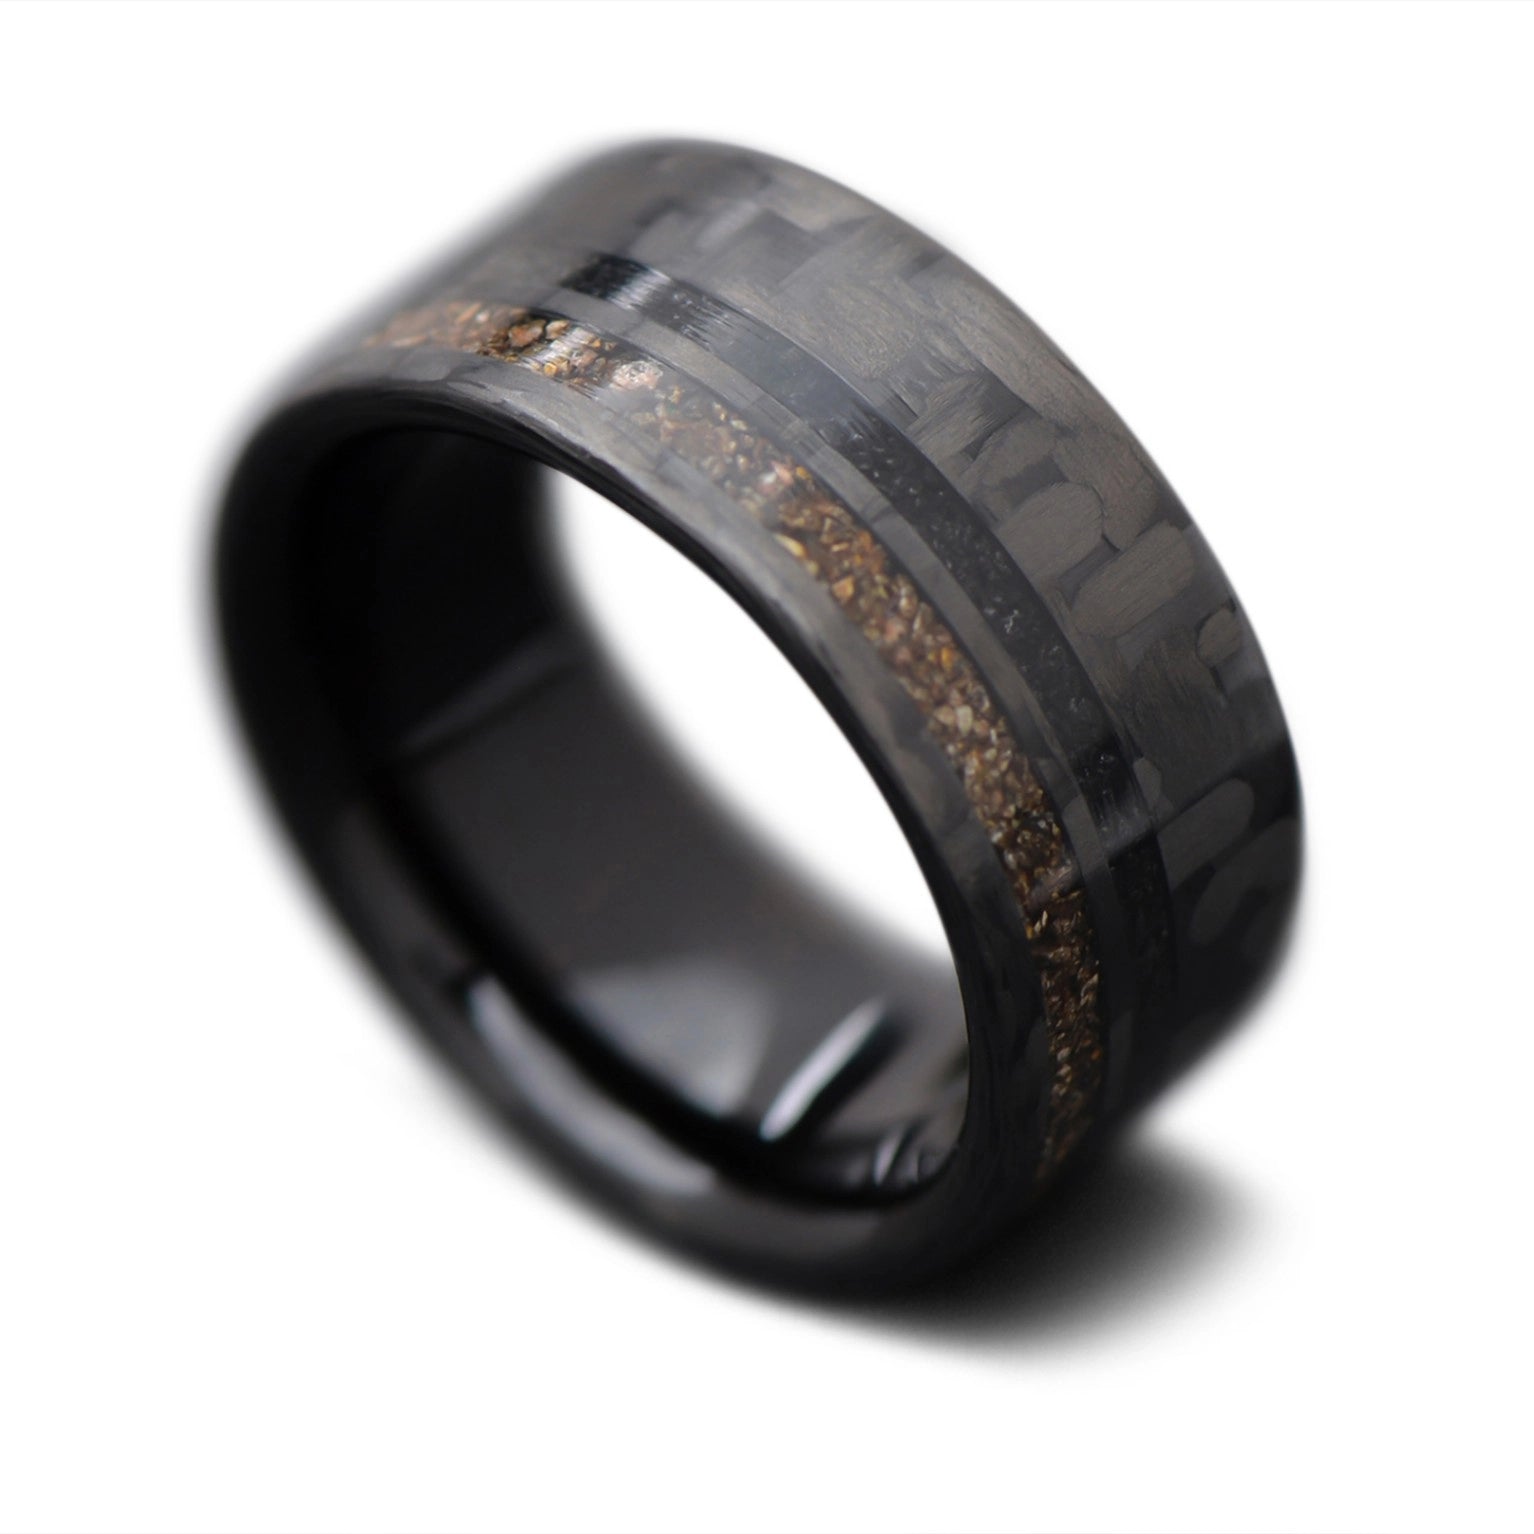  CarbonTwill Core Ring with Black Onyx, Crushed T-Rex inlay and  African Blackwood inner sleeve, 10mm -THE SEEKER